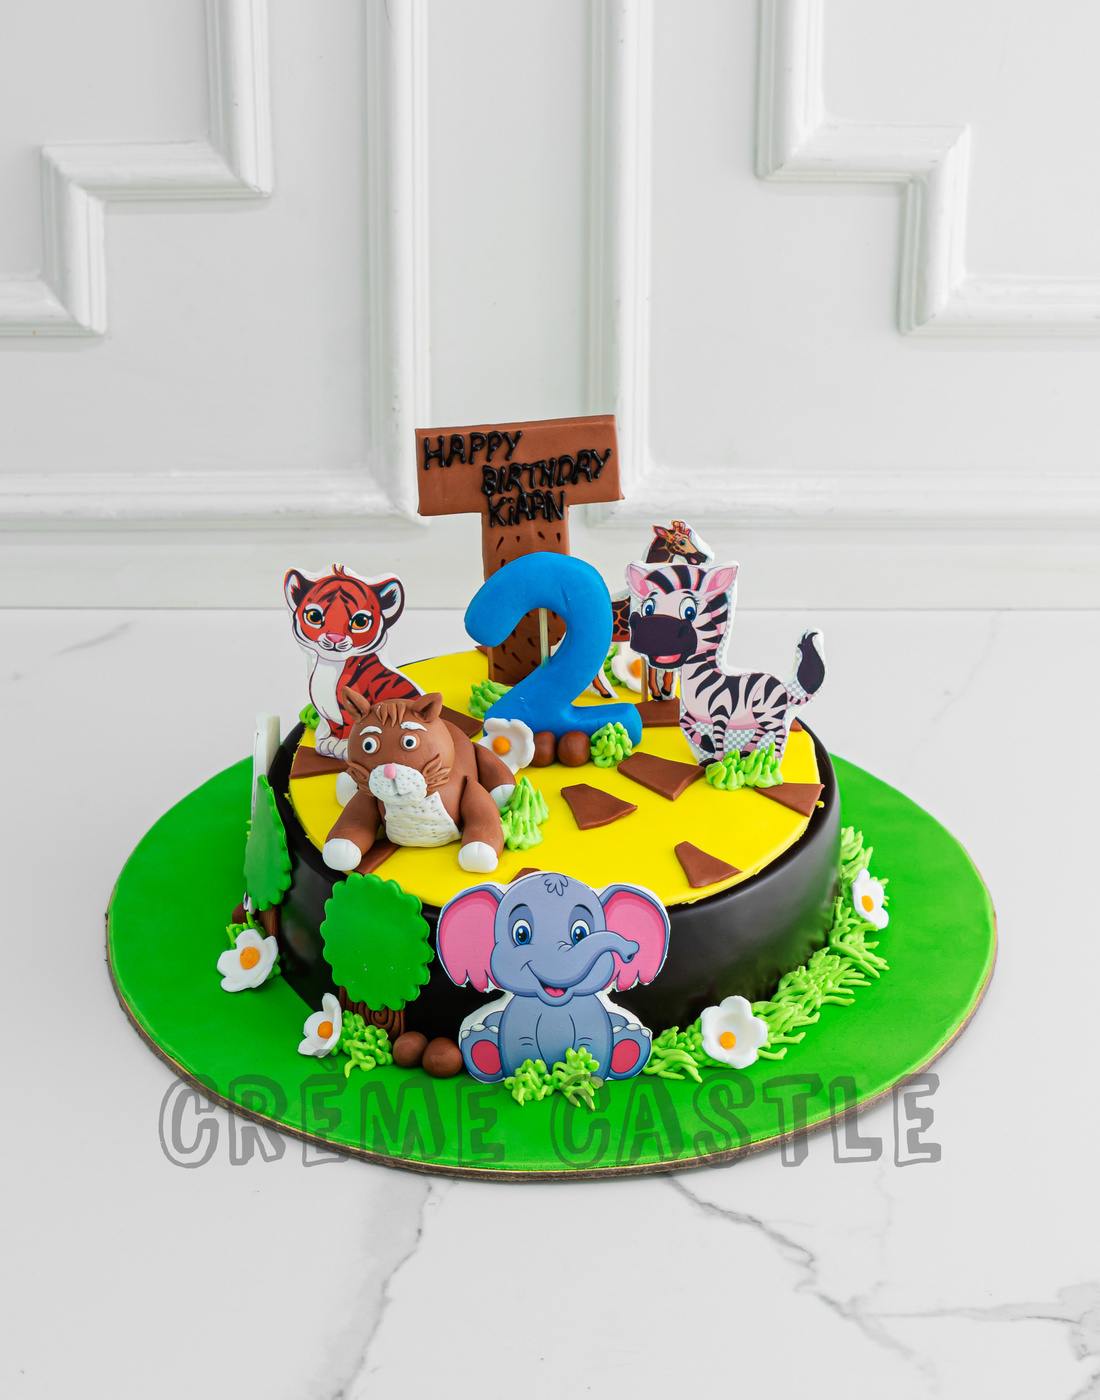 Pin by Anne Michelle on Jungle Book Themed Cake | Jungle book cake, Jungle  book birthday, Book cake